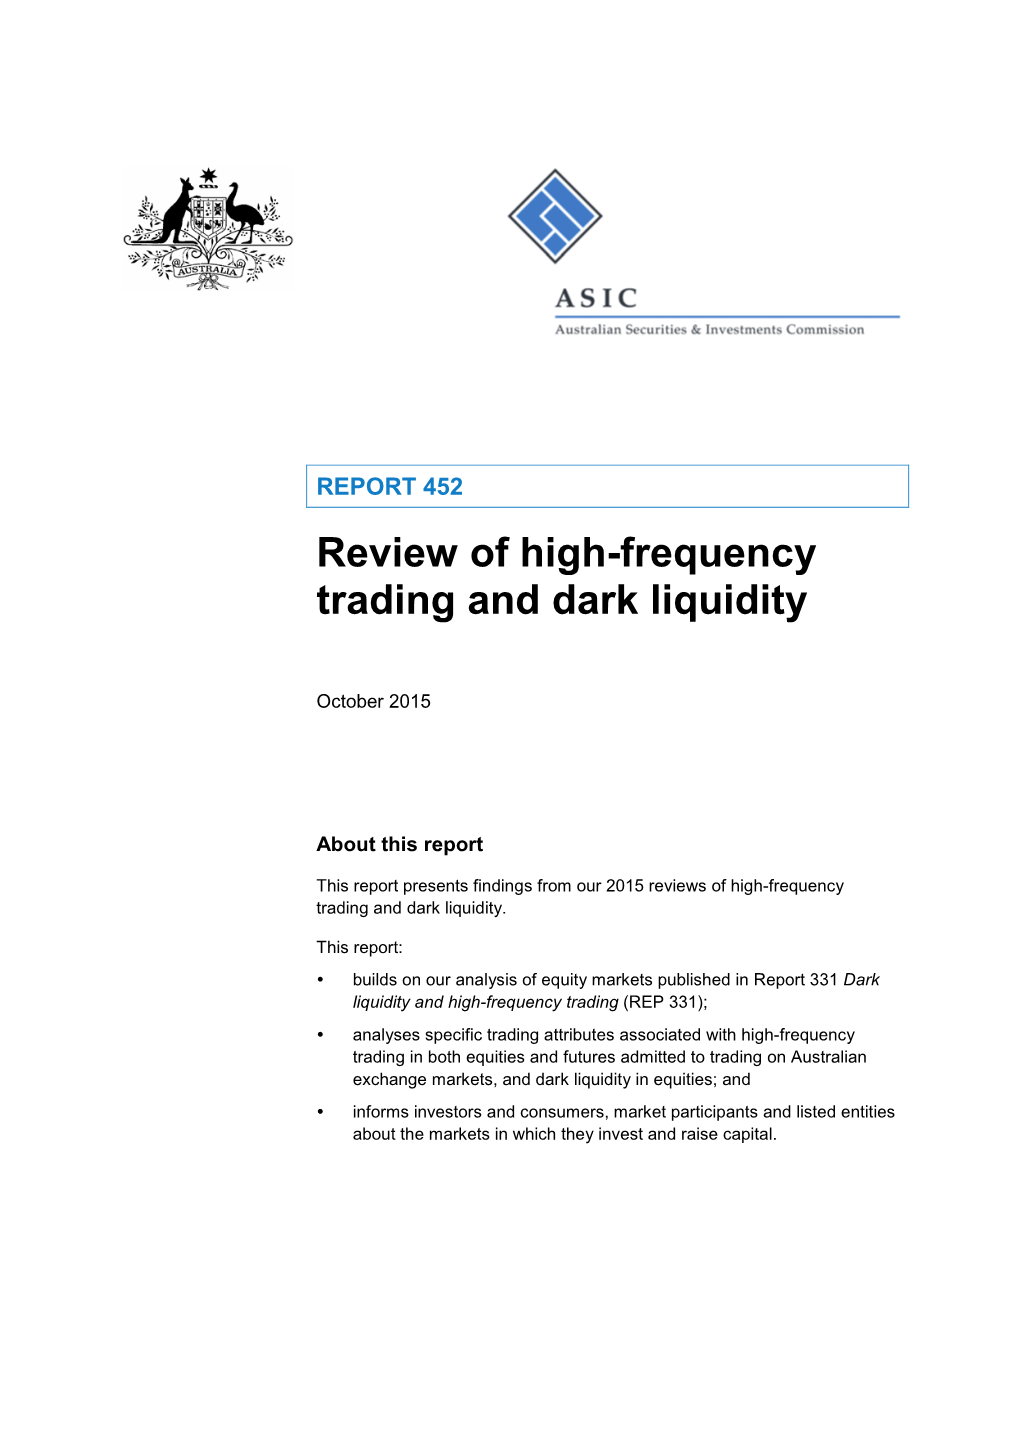 REP 452 Review of High-Frequency Trading and Dark Liquidity